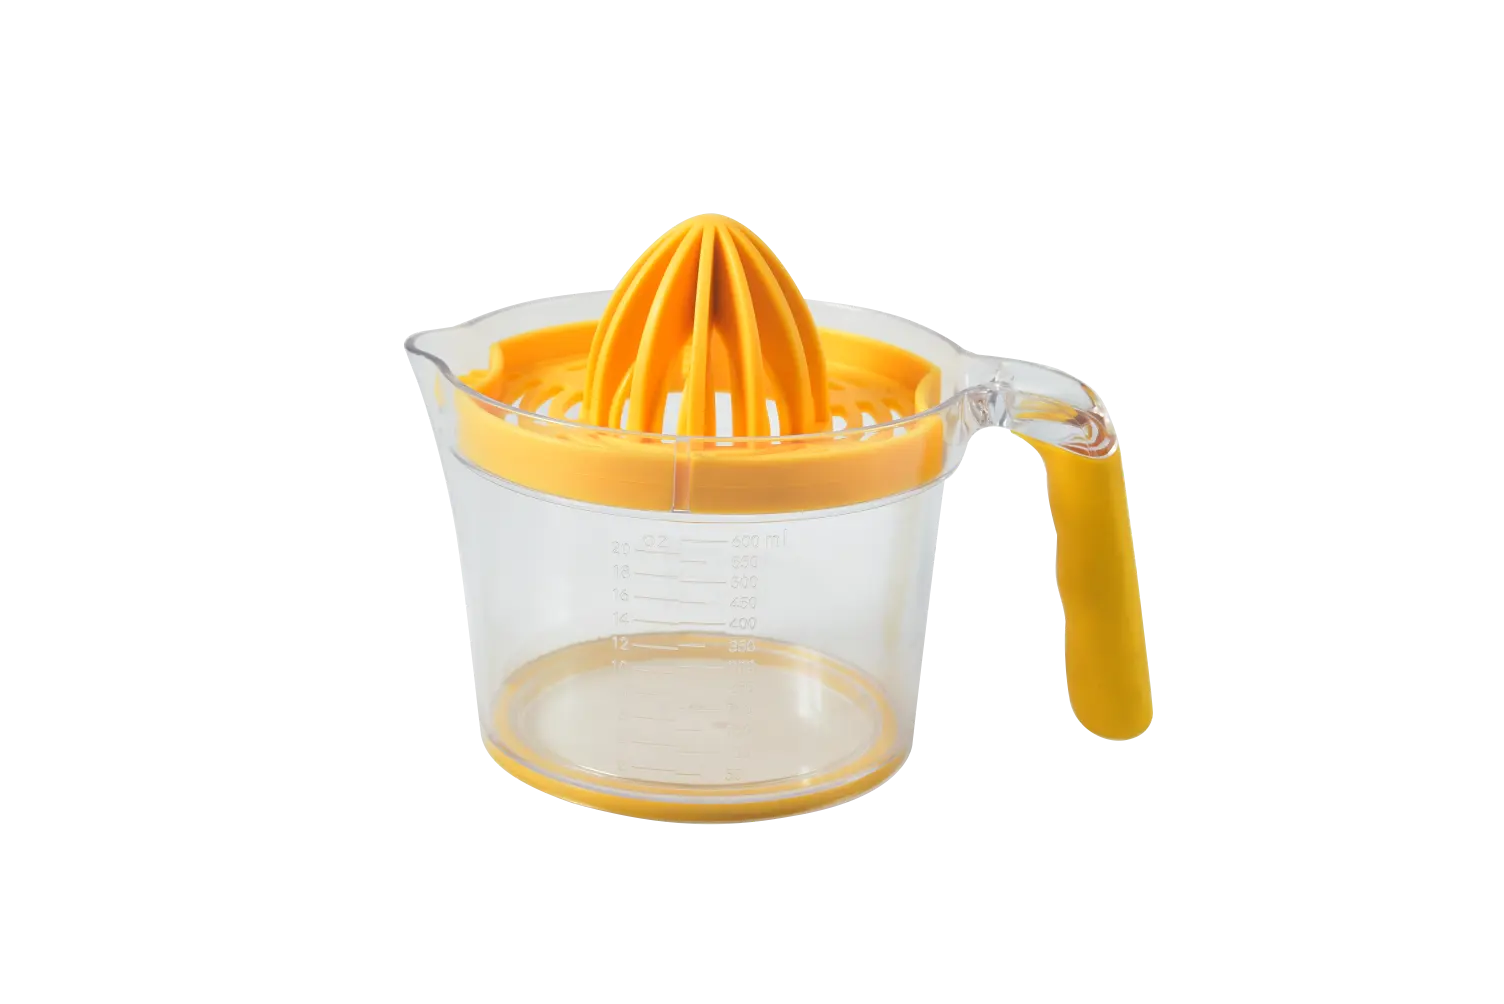 Hot Selling Kitchen Portable Useful Multi-function Hand Operated Press Squeezer Fruit Citrus Orange Manual Juicer